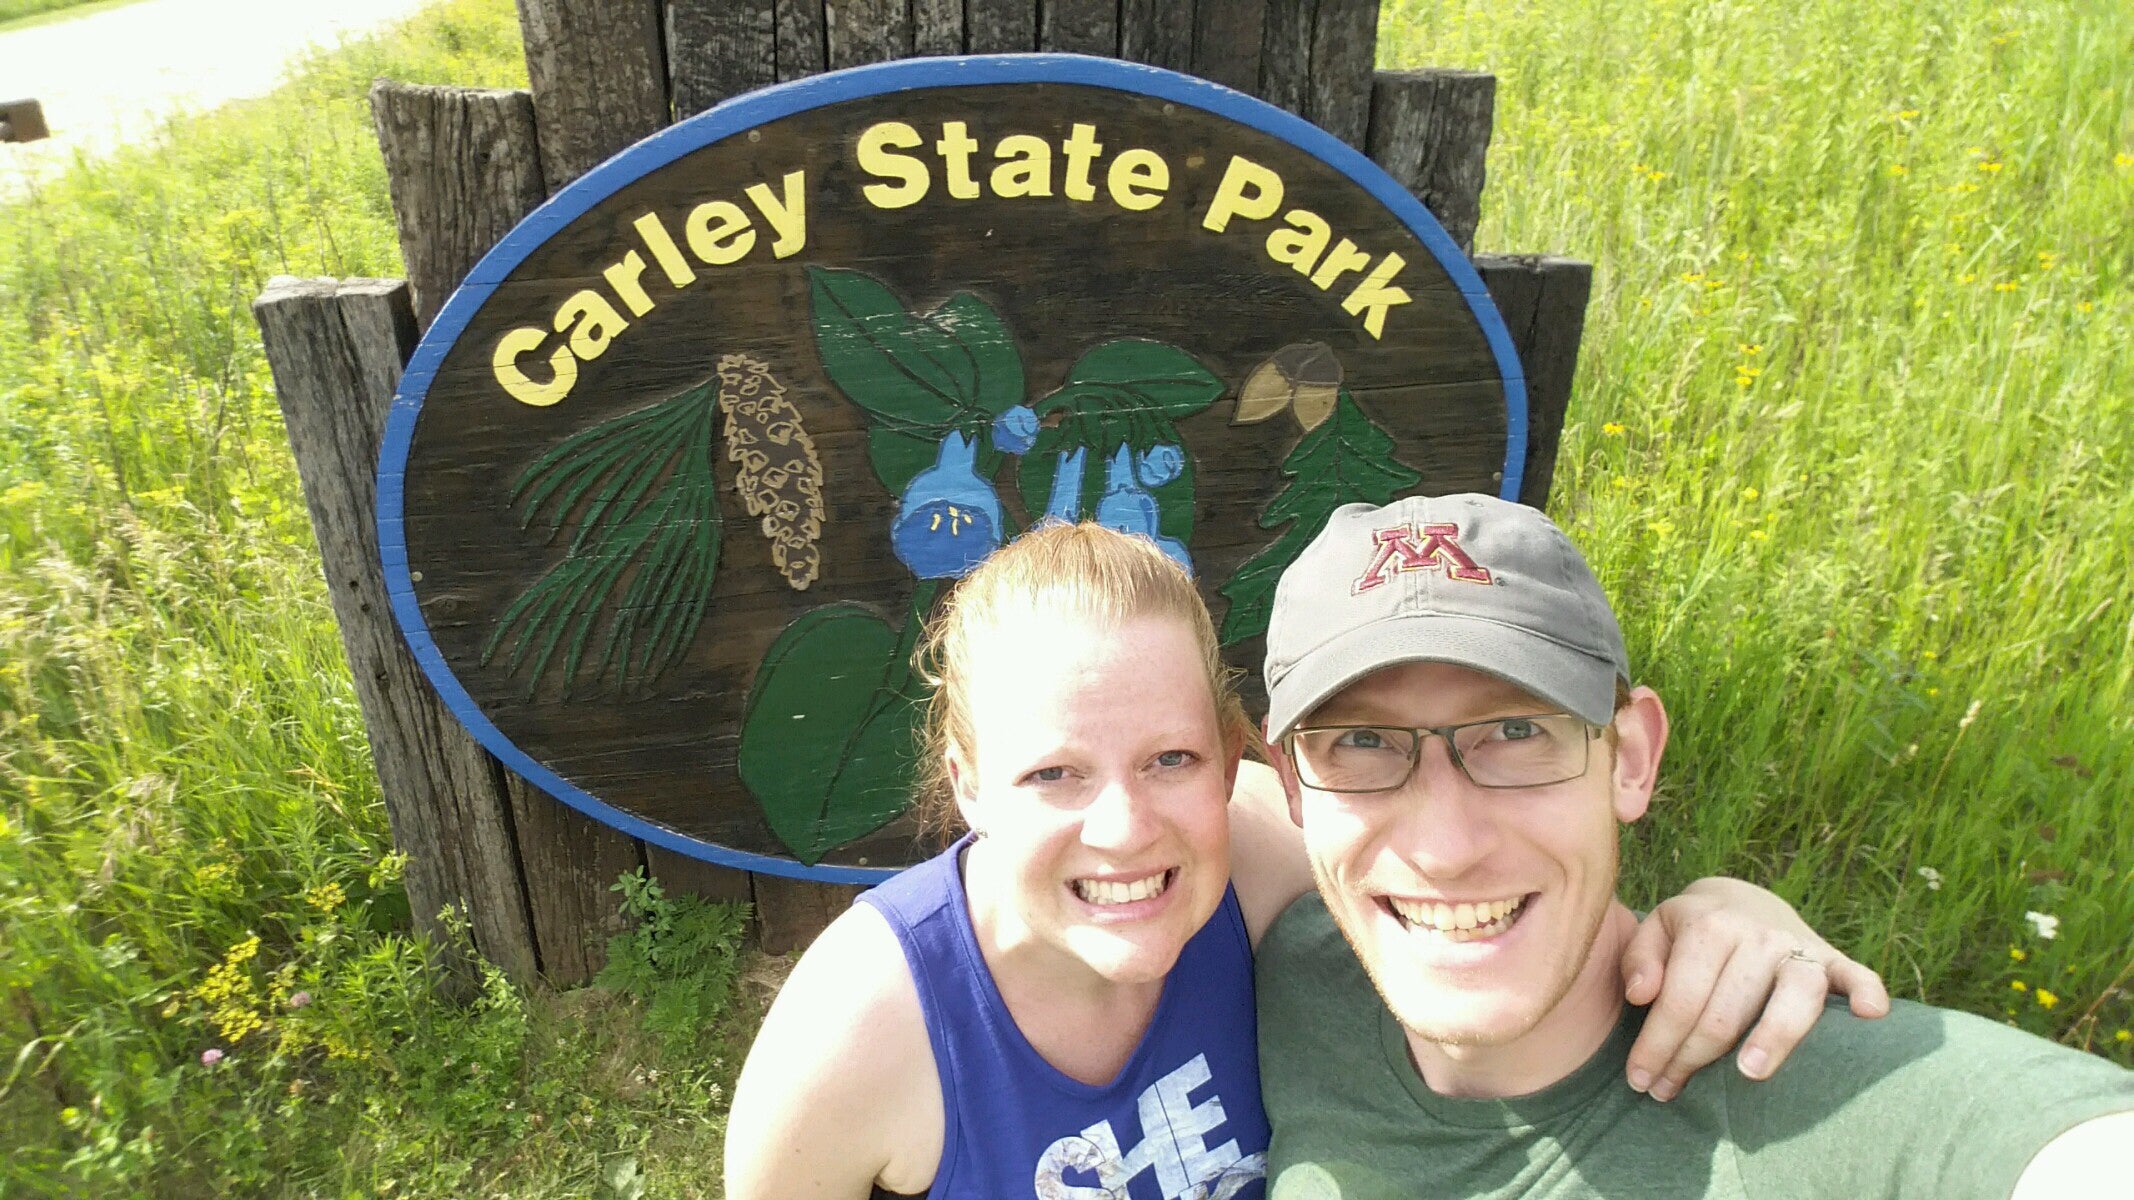 Small and quick State Park visit!  A great day trip or 1-2 hour lunch/hike stop.